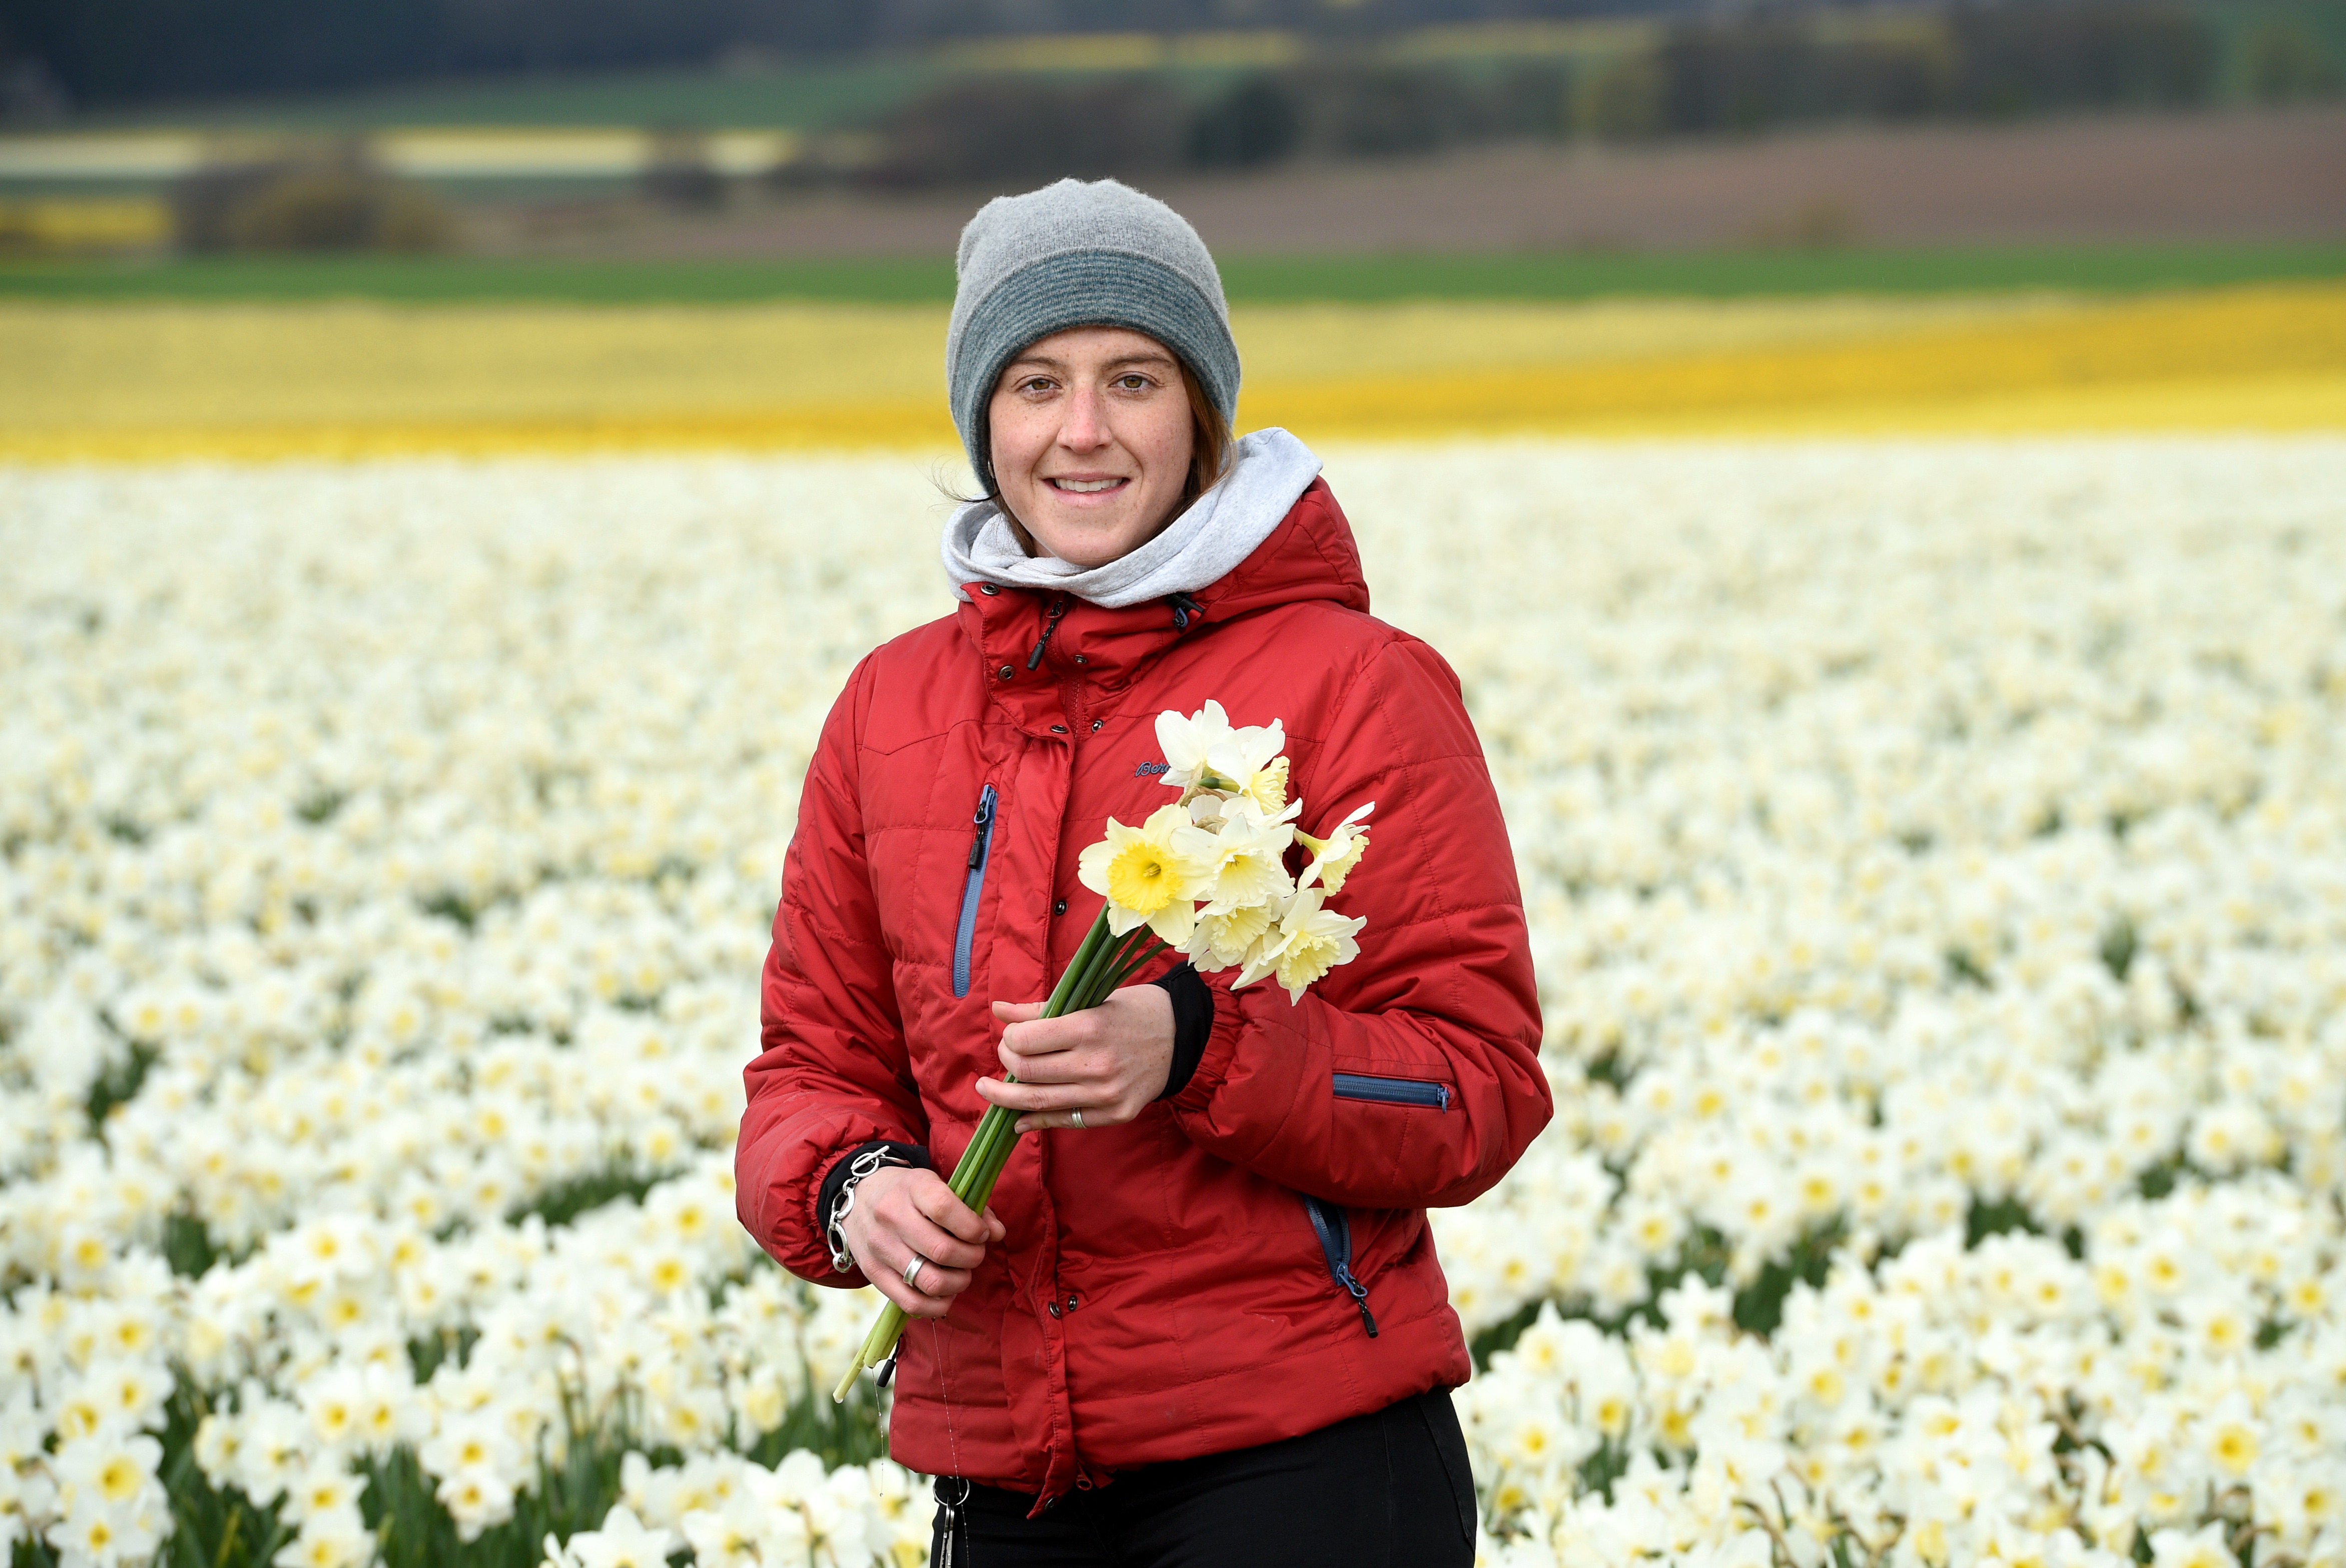 Grampian Growers, based in Montrose, have sold out of daffodils after their best harvest in 12 years.